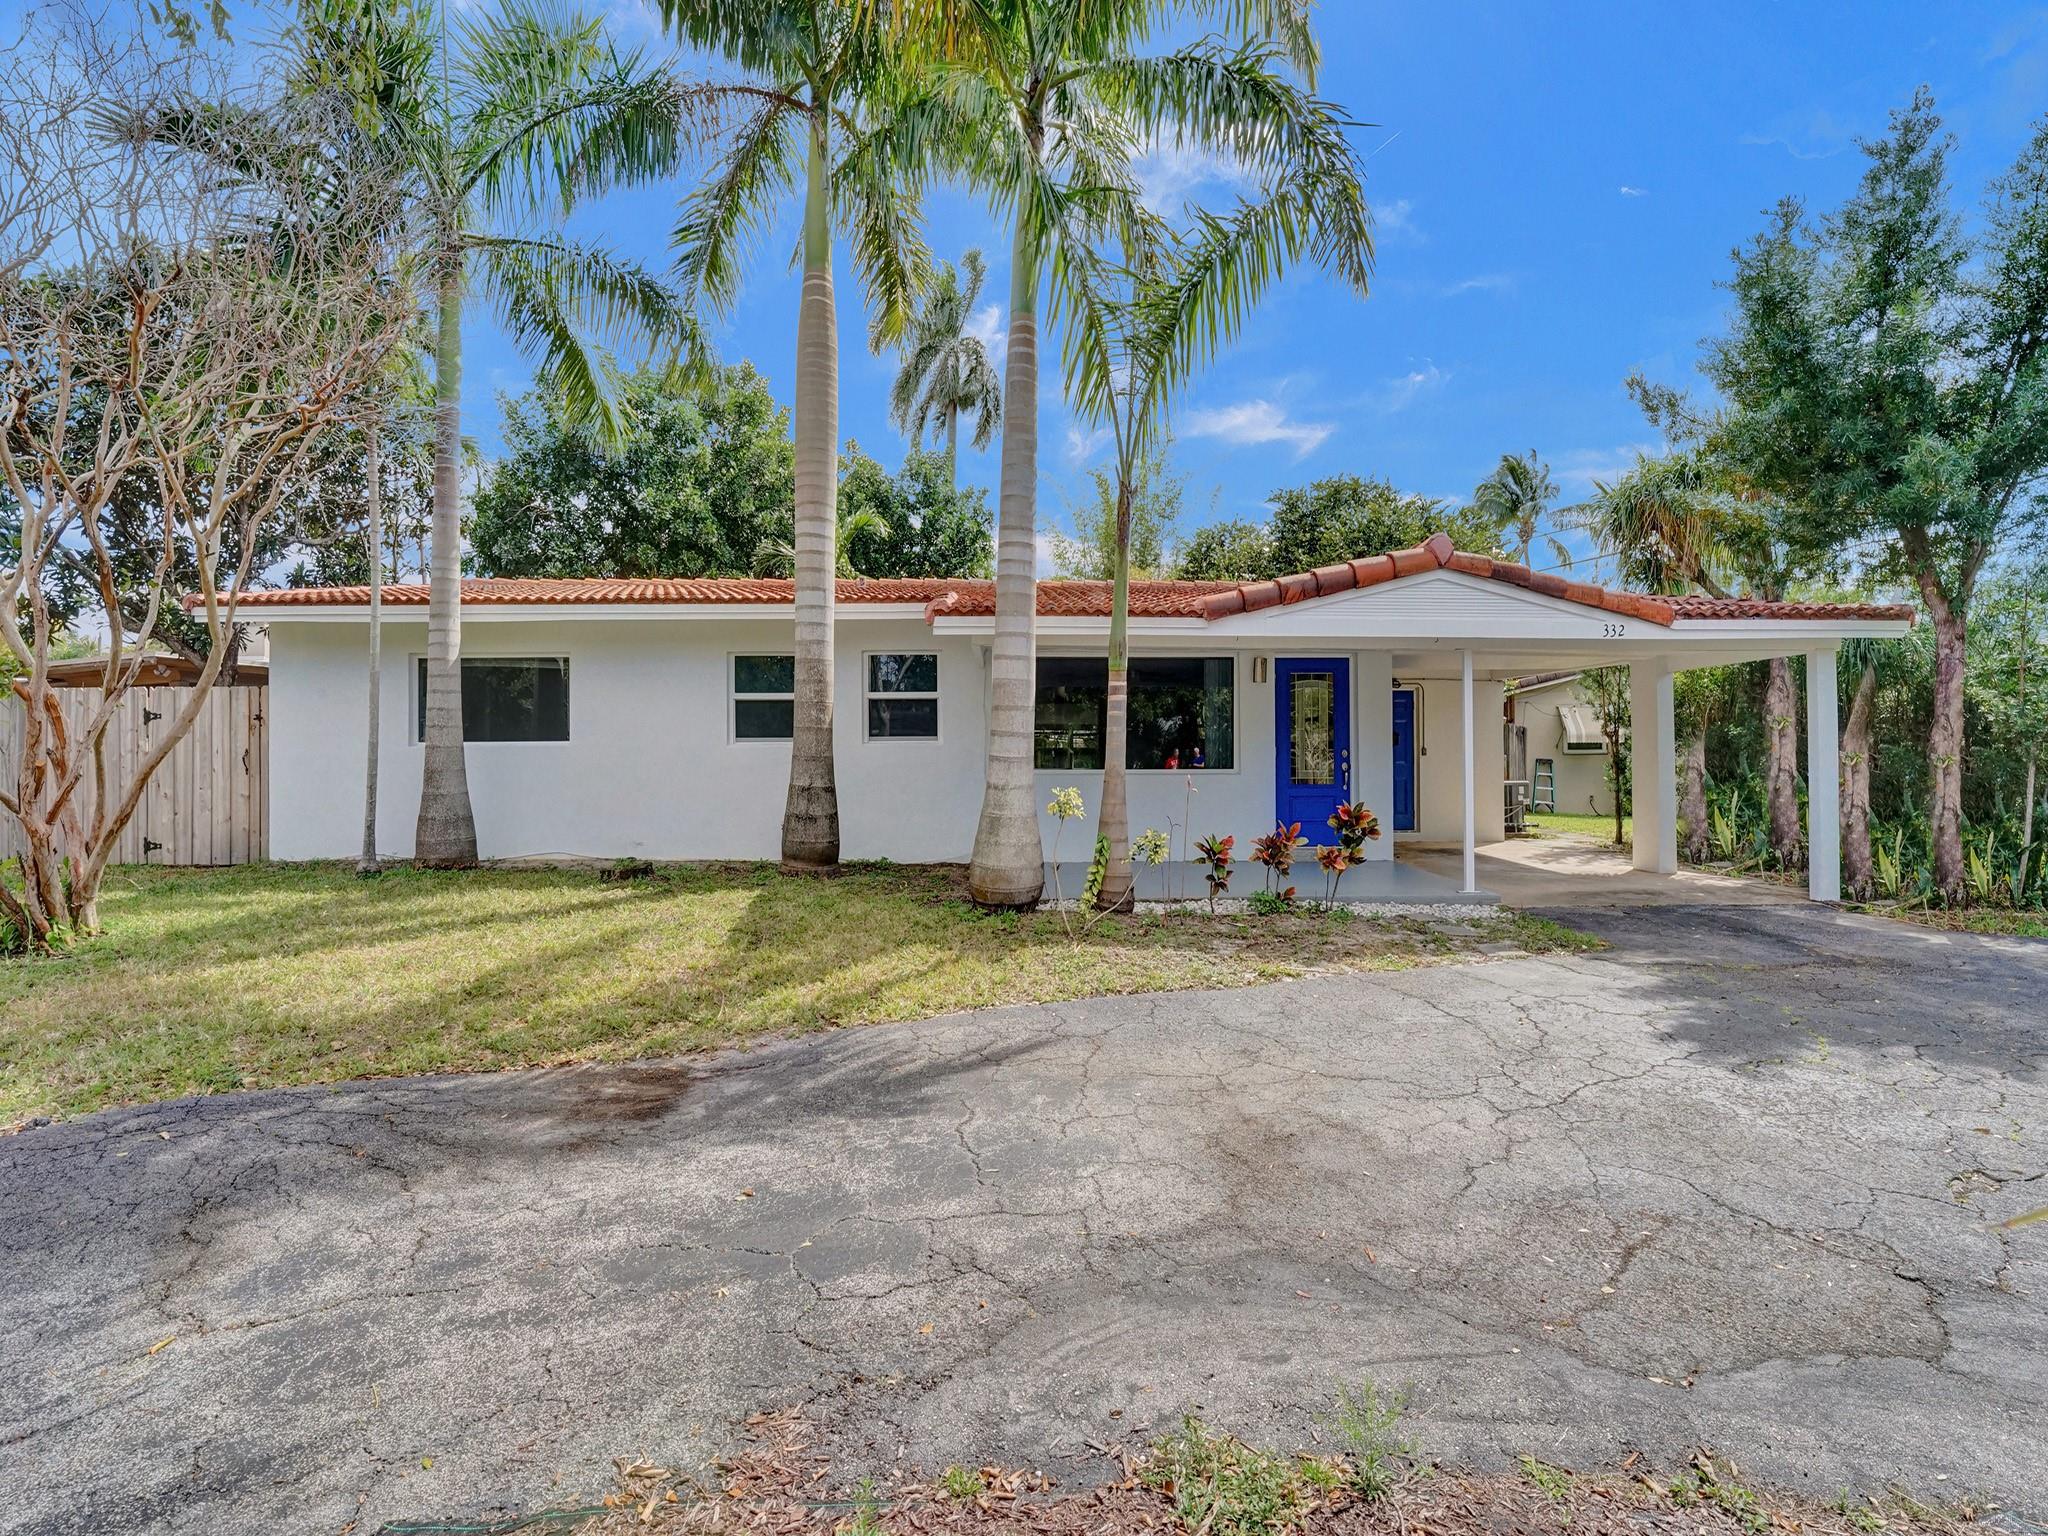 Price Improvement - MOTIVATED SELLER - BRING ALL OFFERS - UPDATED SINGLE FAMILY 3/2 HOME IN THE HEART OF CENTRAL WILTON MANORS, IN THE TROPICAL MANORS NEIGHBORHOOD. WITHIN MINUTES OF NIGHTLIFE, RESTAURANTS, SHOPPING, GROCERY, CHURCHES, CORAL RIDGE MALL, OCEAN, AIRPORT AND CRUISEPORT. GREAT OPEN FLOOR PLAN, OFFICE SPACE/FLORIDA ROOM, NEW APPLIANCES, IMPACT WINDOWS AND LARGE CORNER LOT, TERAZZO FLOORS, FRESHLY PAIANTED INSIDE & OUT, ROOM FOR A POOL. GREAT LOCATION!